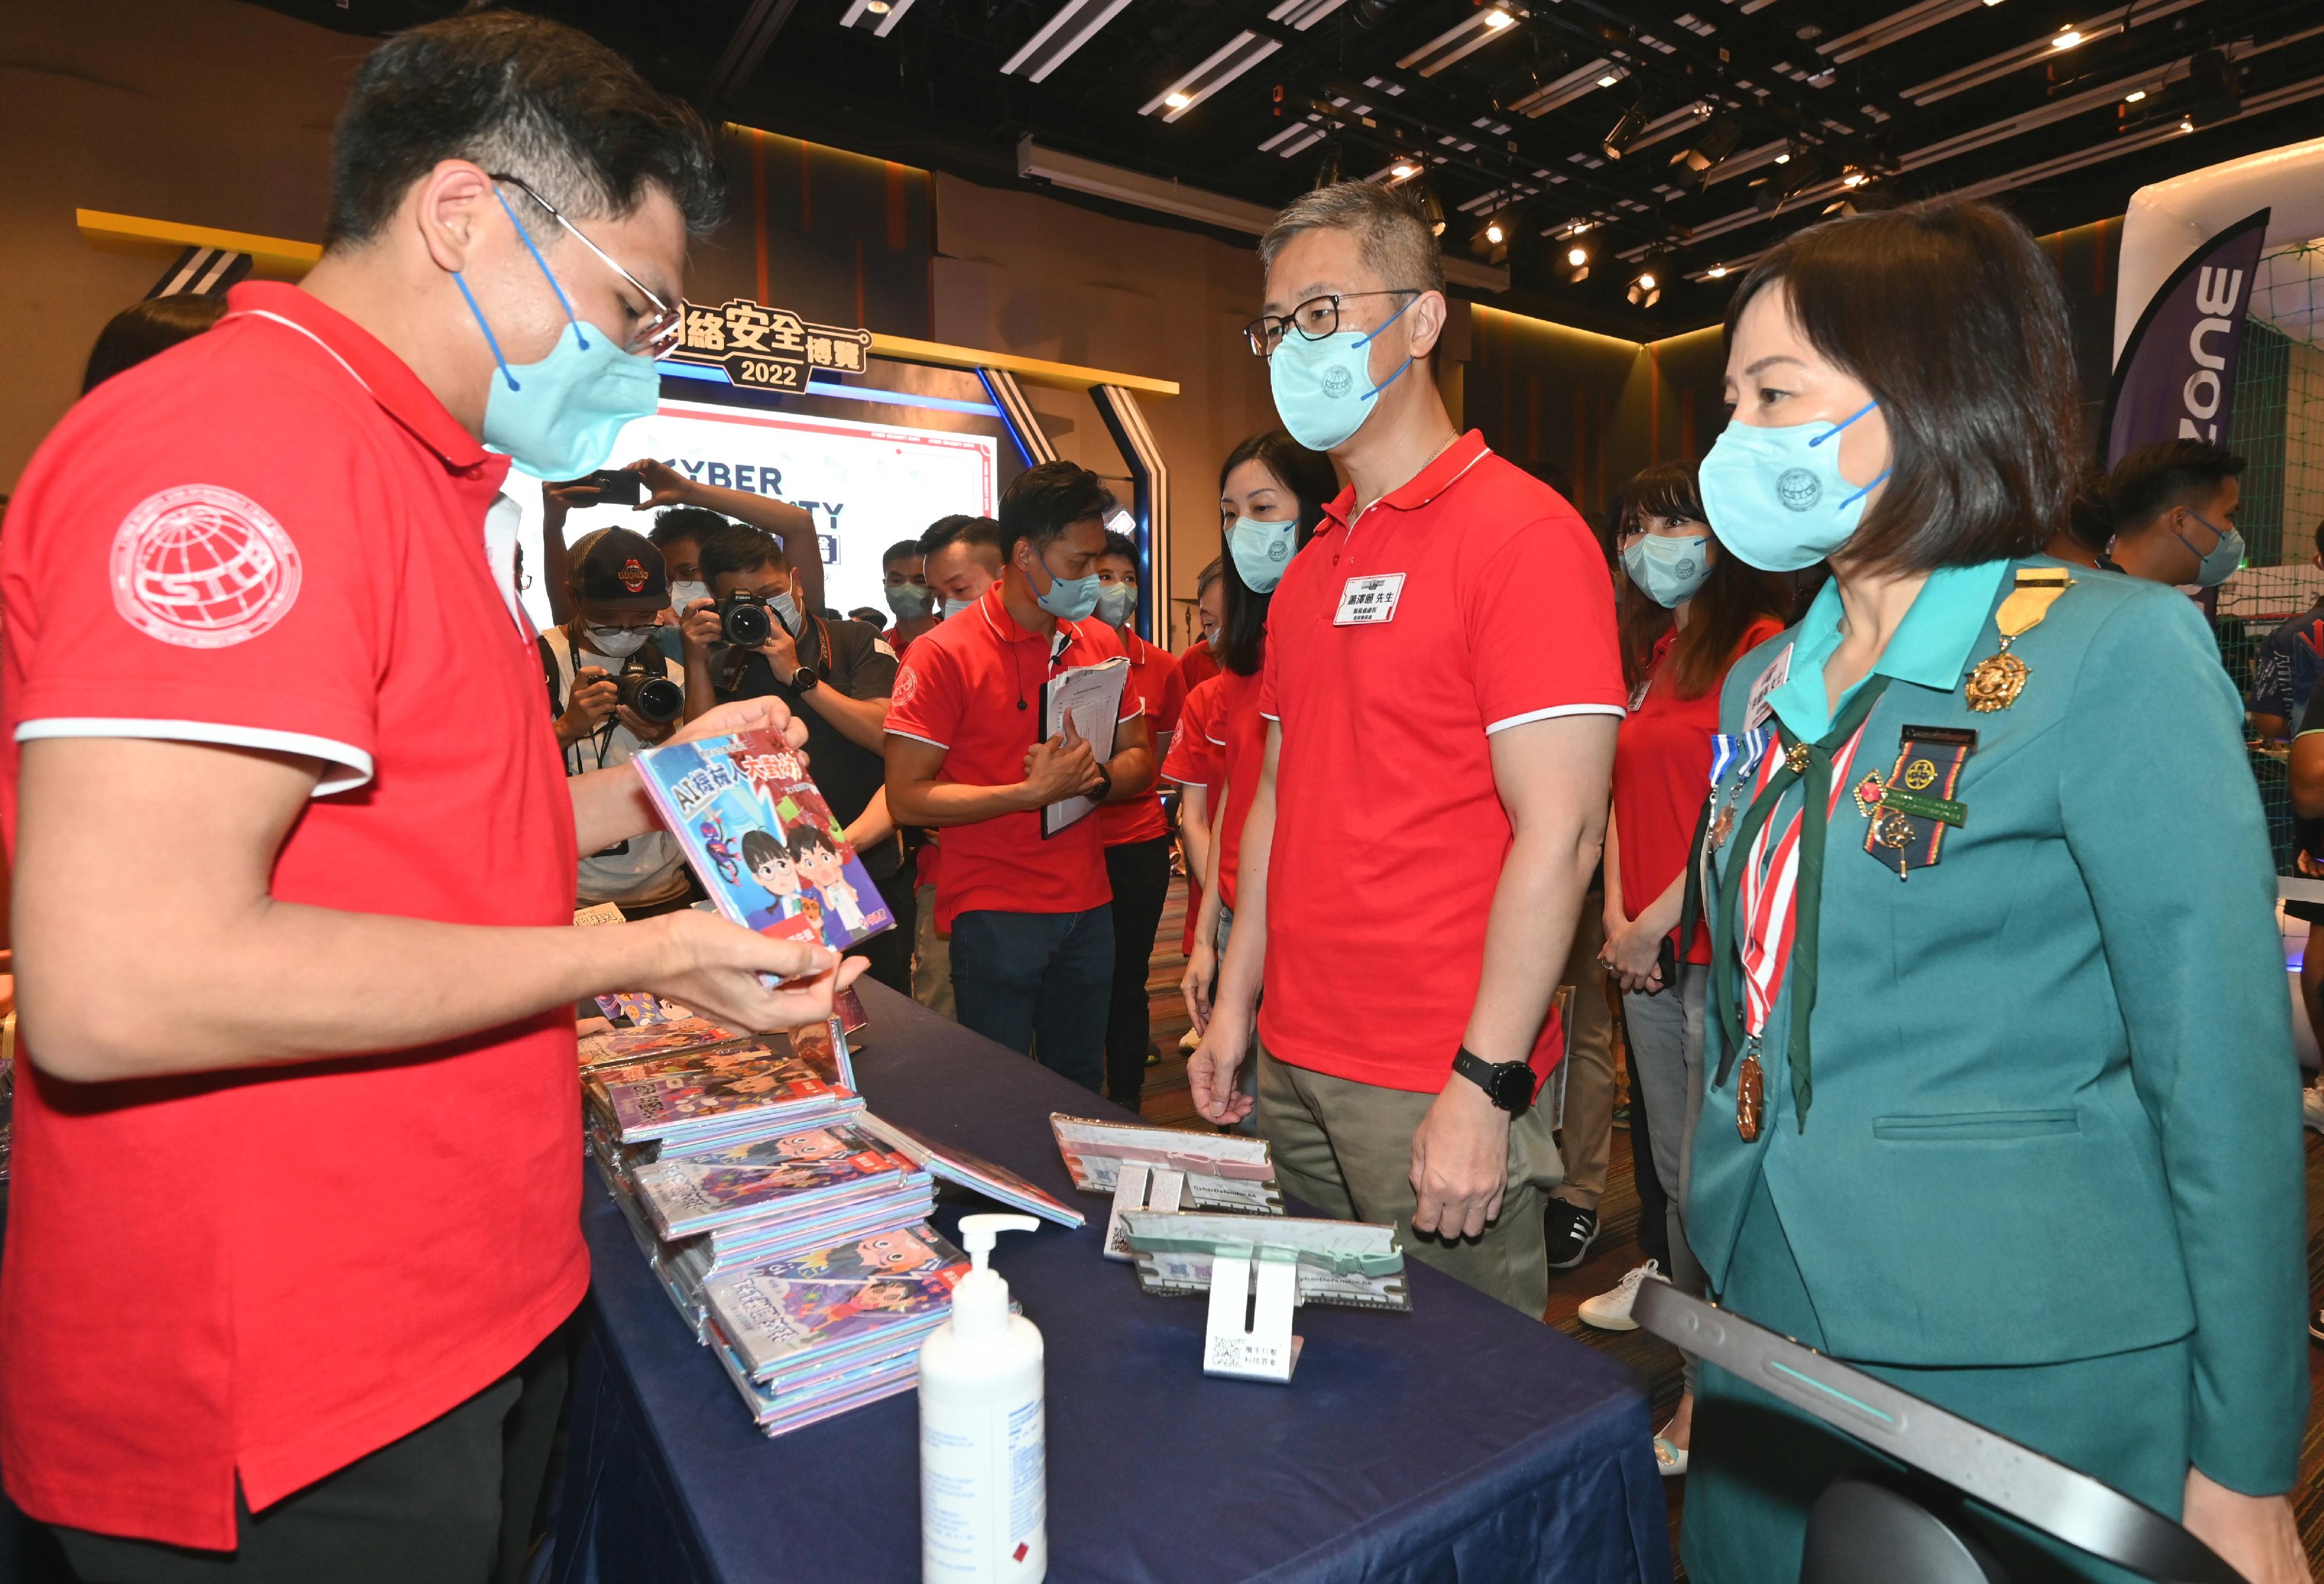 The Cyber Security Expo 2022 kicks off today (September 17). Photo shows the Commissioner of the Police, Mr Siu Chak-yee (second right) and the Chief Commissioner of the Hong Kong Girl Guides Association, Ms Jeanne Lee (first right) touring the Cyber Security and Technology Crime Bureau’s exhibition booth. An officer briefed them on the three story books designed by the Bureau to teach primary students how to handle cyber bullying, social networking traps and knowledge about Internet of Things (IoT).

